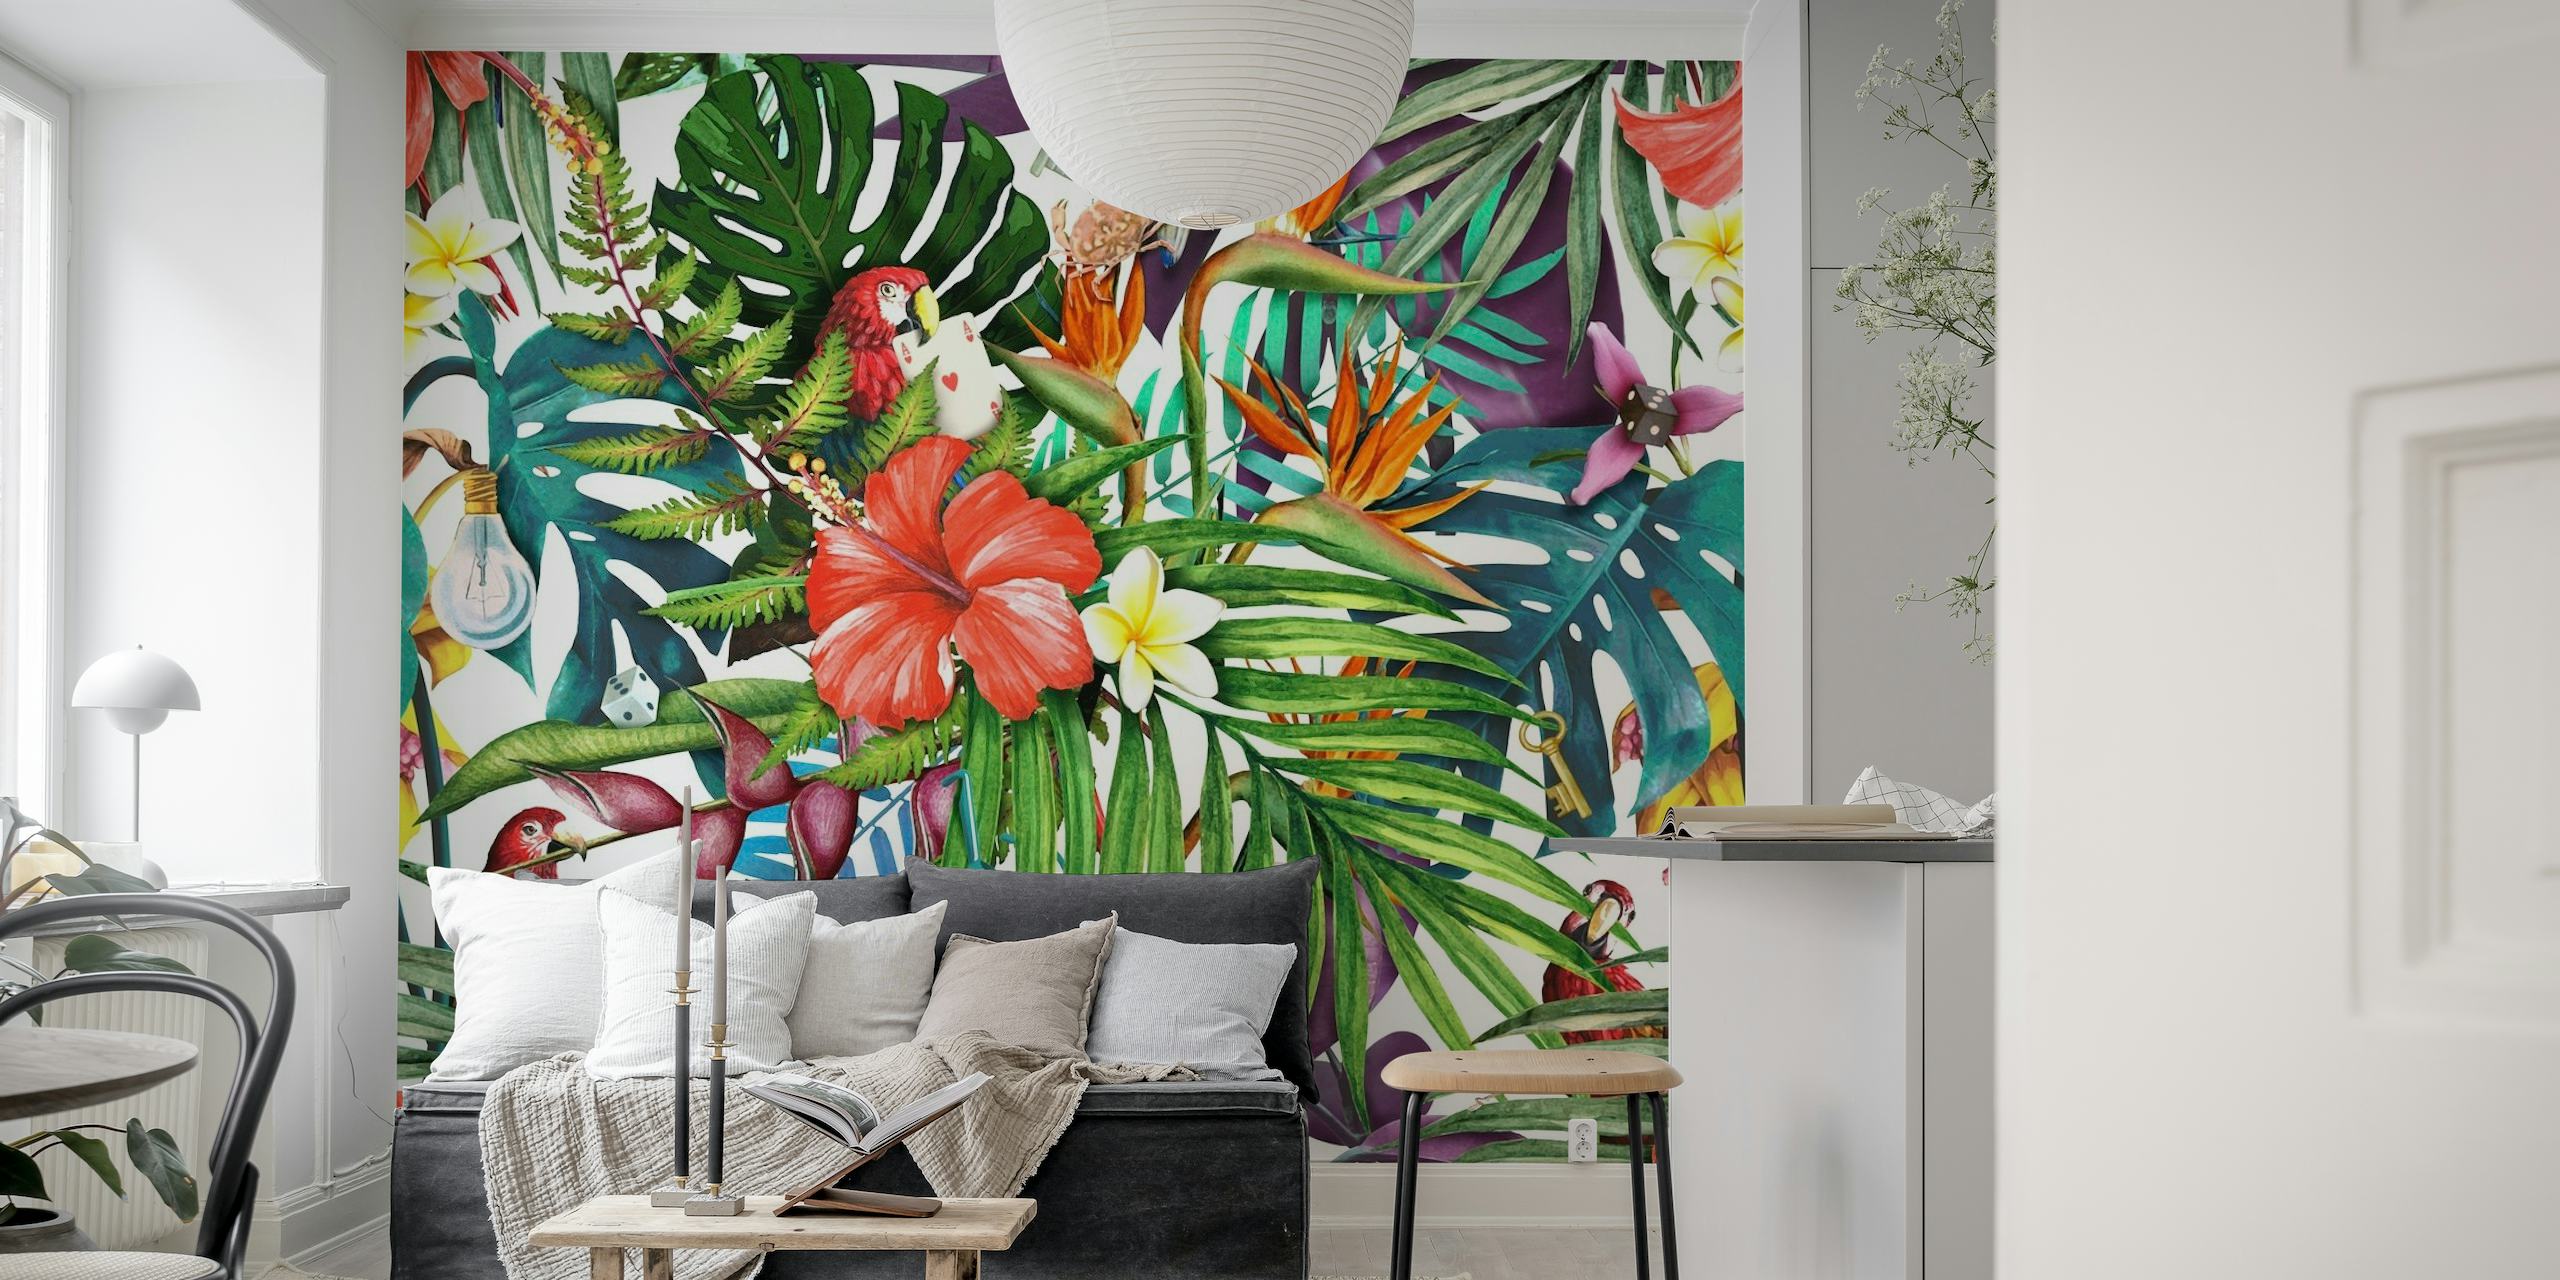 Tropical jungle wall mural with vibrant flowers and lush foliage